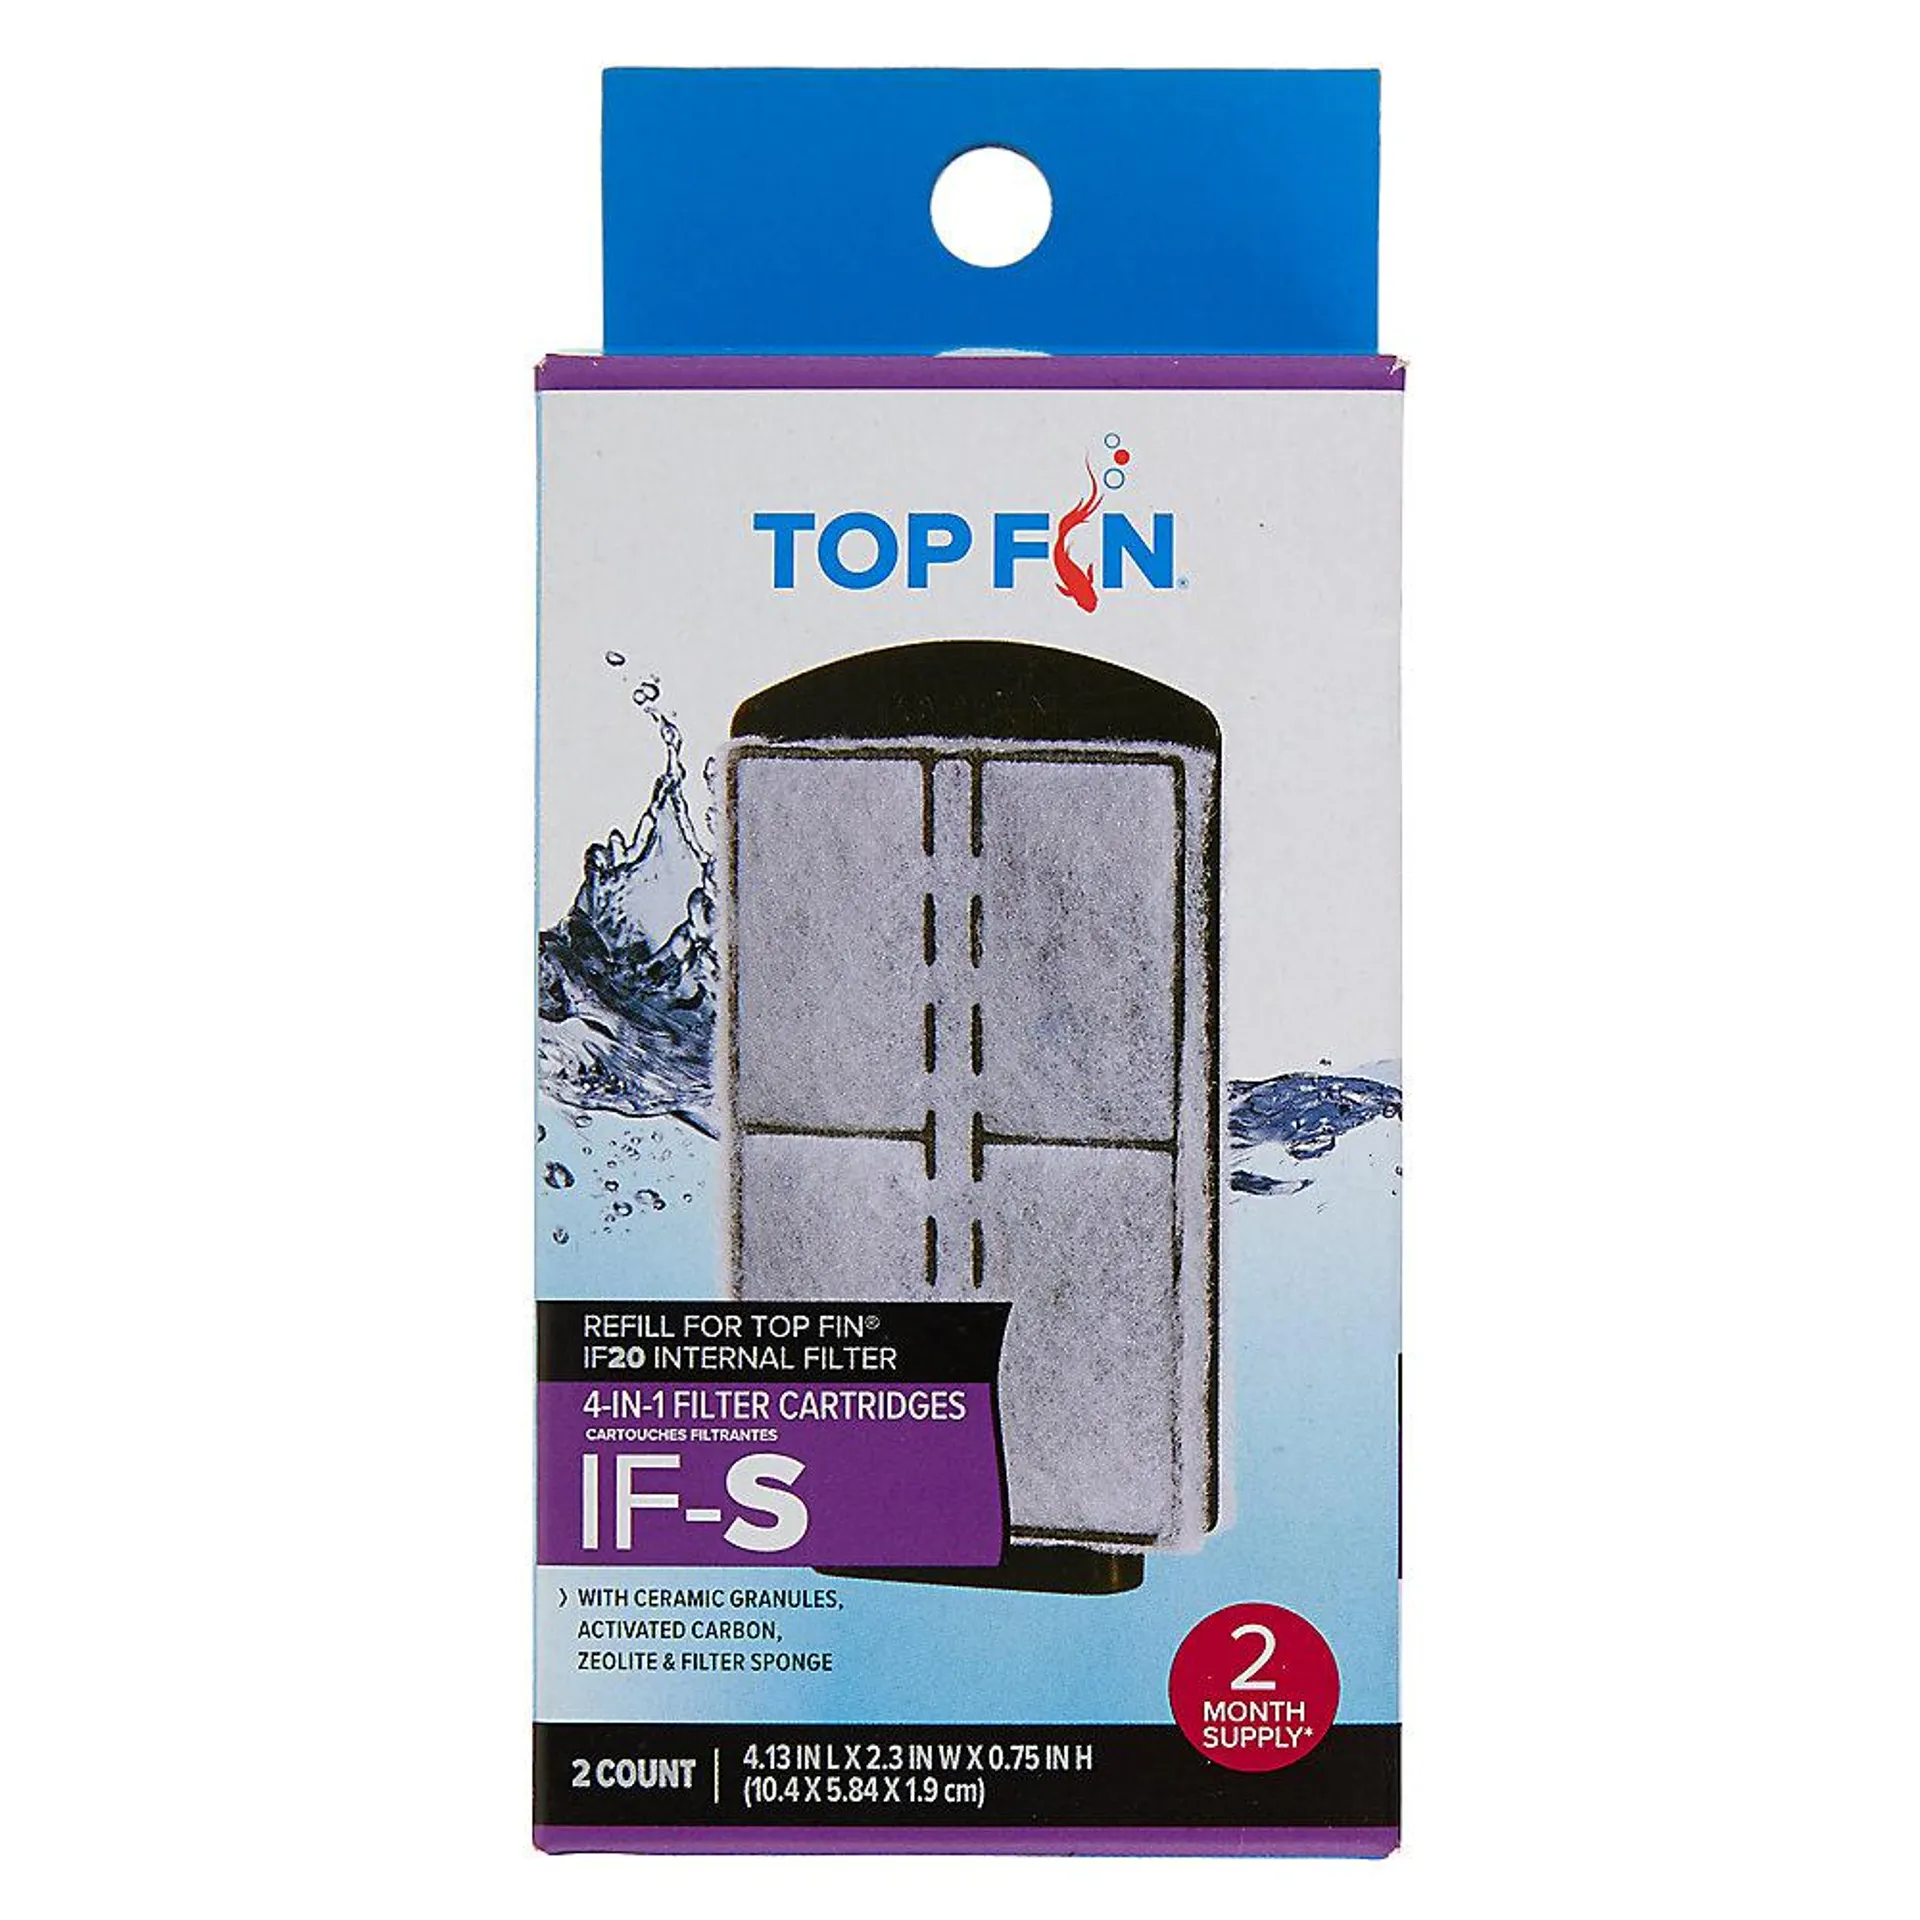 Top Fin® IF-S 4-IN-1 Filter Cartridges